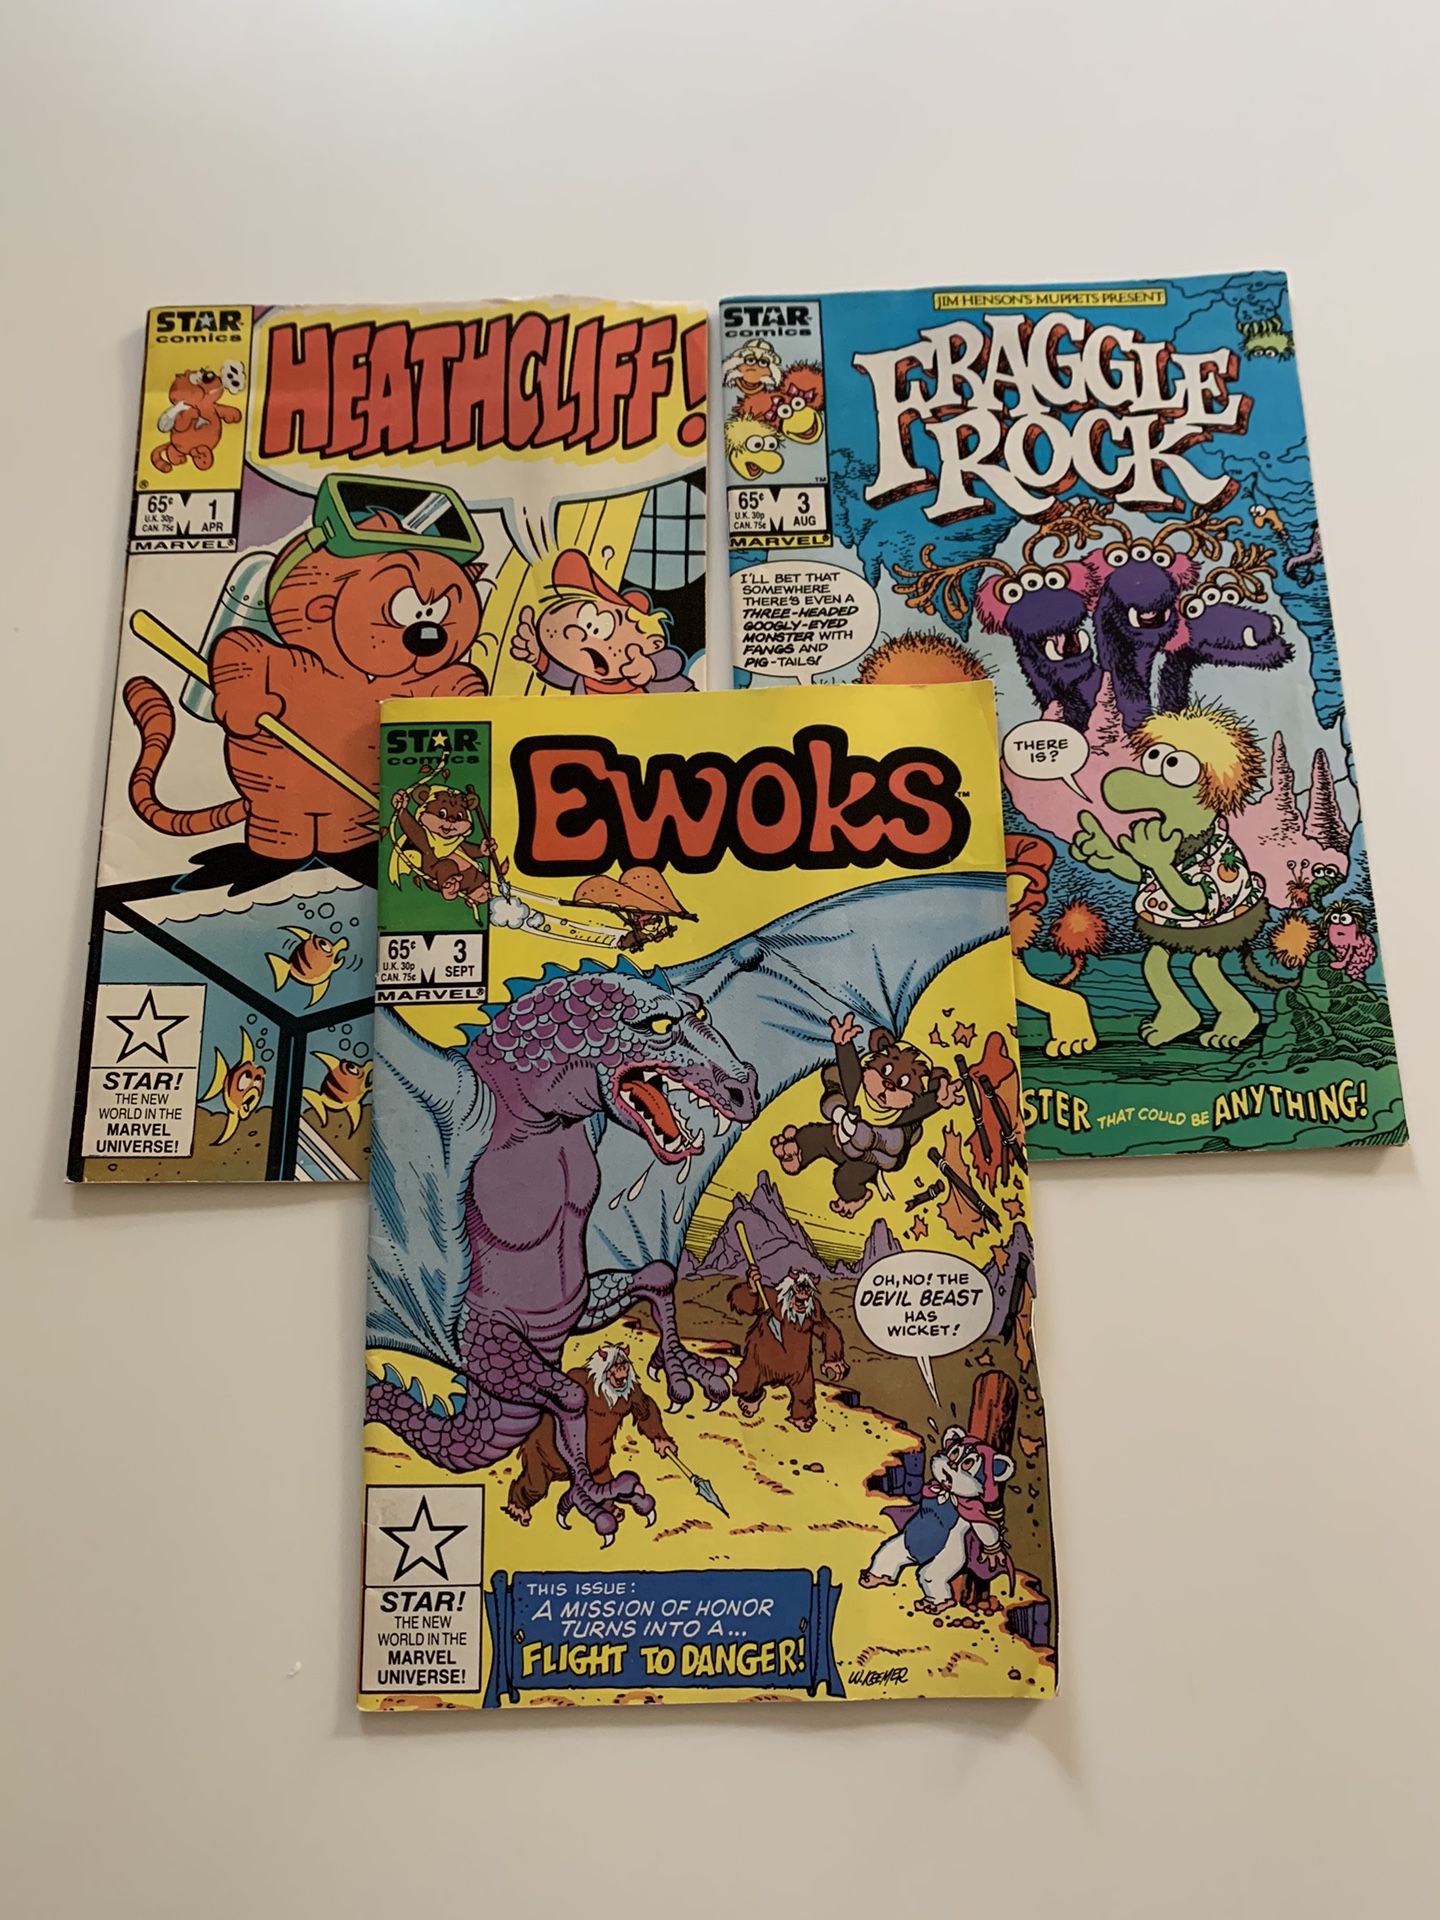 MARVEL/STAR Comic Books From 1985: Heathcliff (4/1/85), Fraggle Rock (8/3/85) and EWOKS (9/3/85) in Very Good Condition (ungraded)